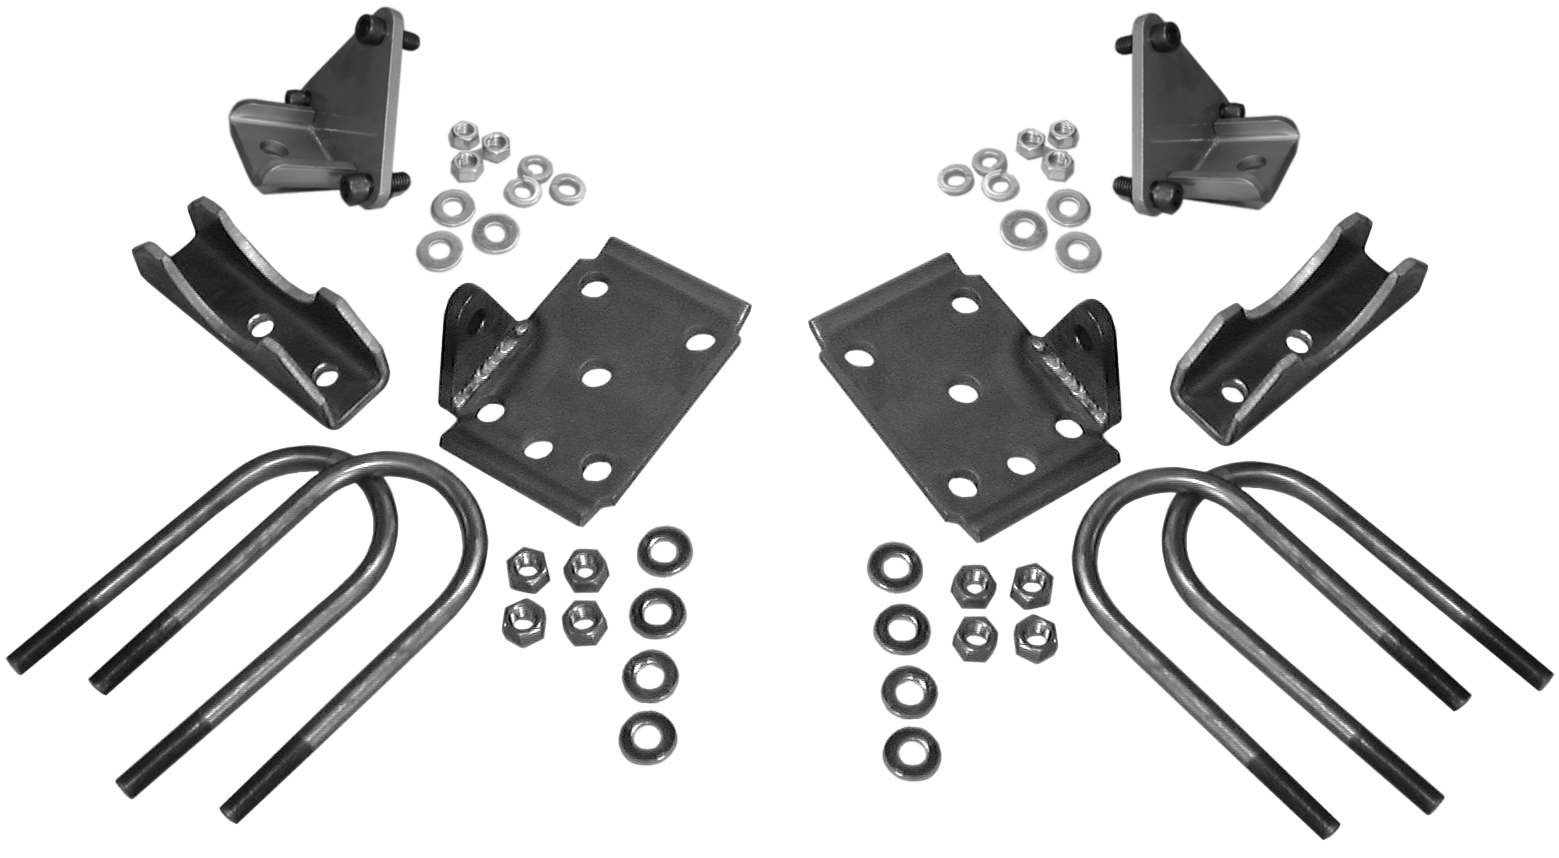 1949-54 Chevy Belair Rear End Conversion Kit with Shock Mounts